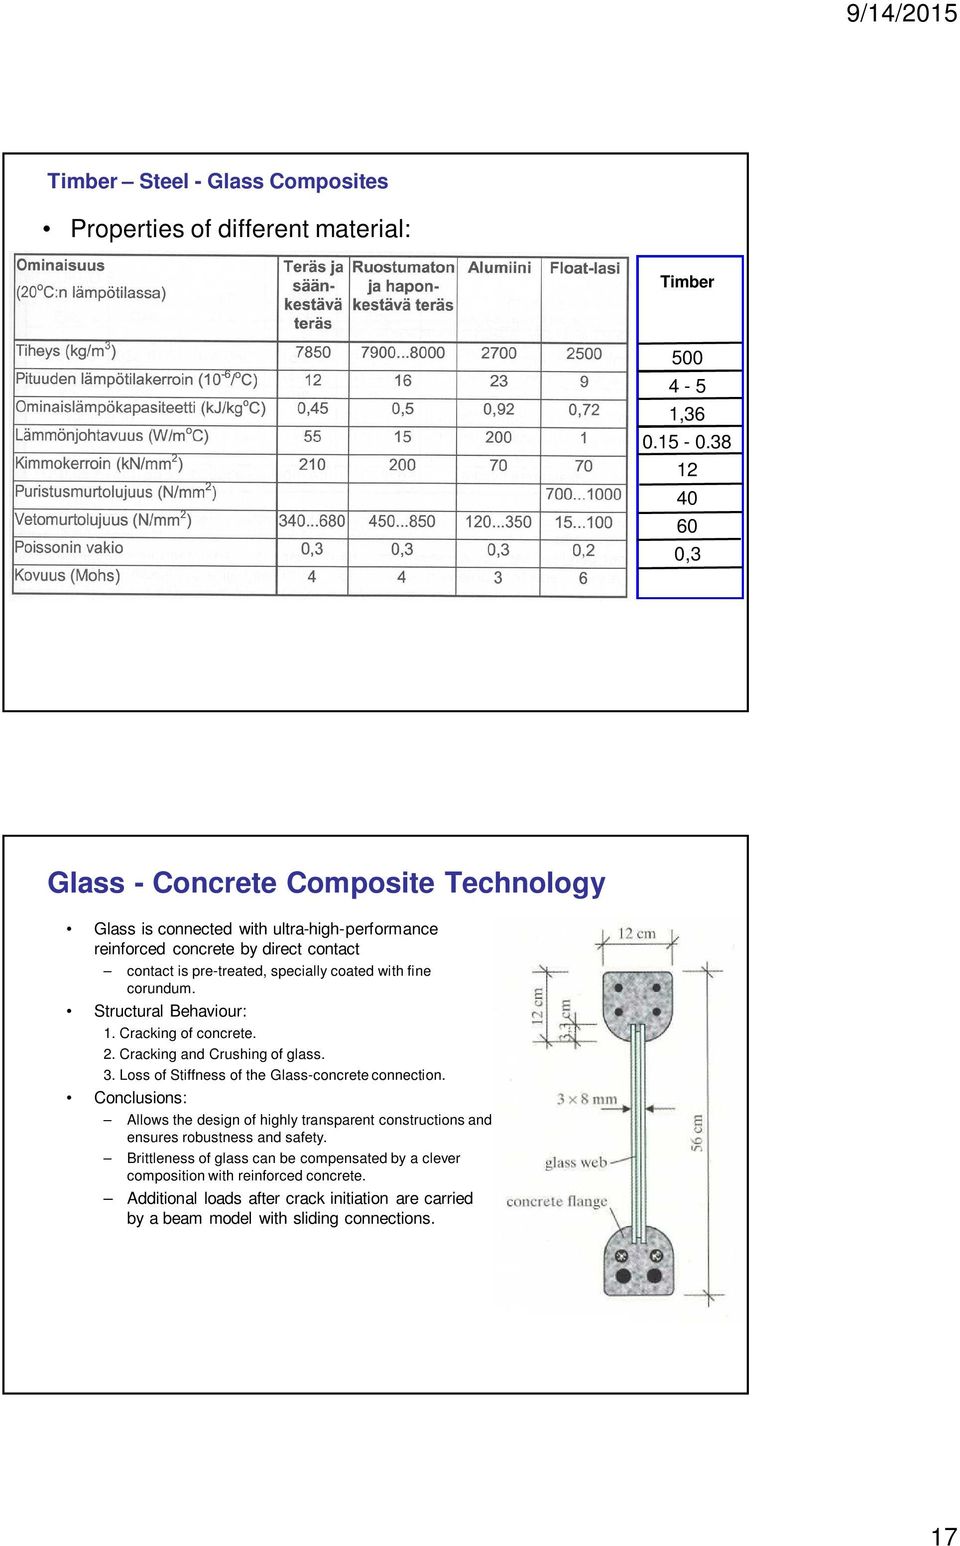 with fine corundum. Structural Behaviour: 1. Cracking of concrete. 2. Cracking and Crushing of glass. 3. Loss of Stiffness of the Glass-concrete connection.